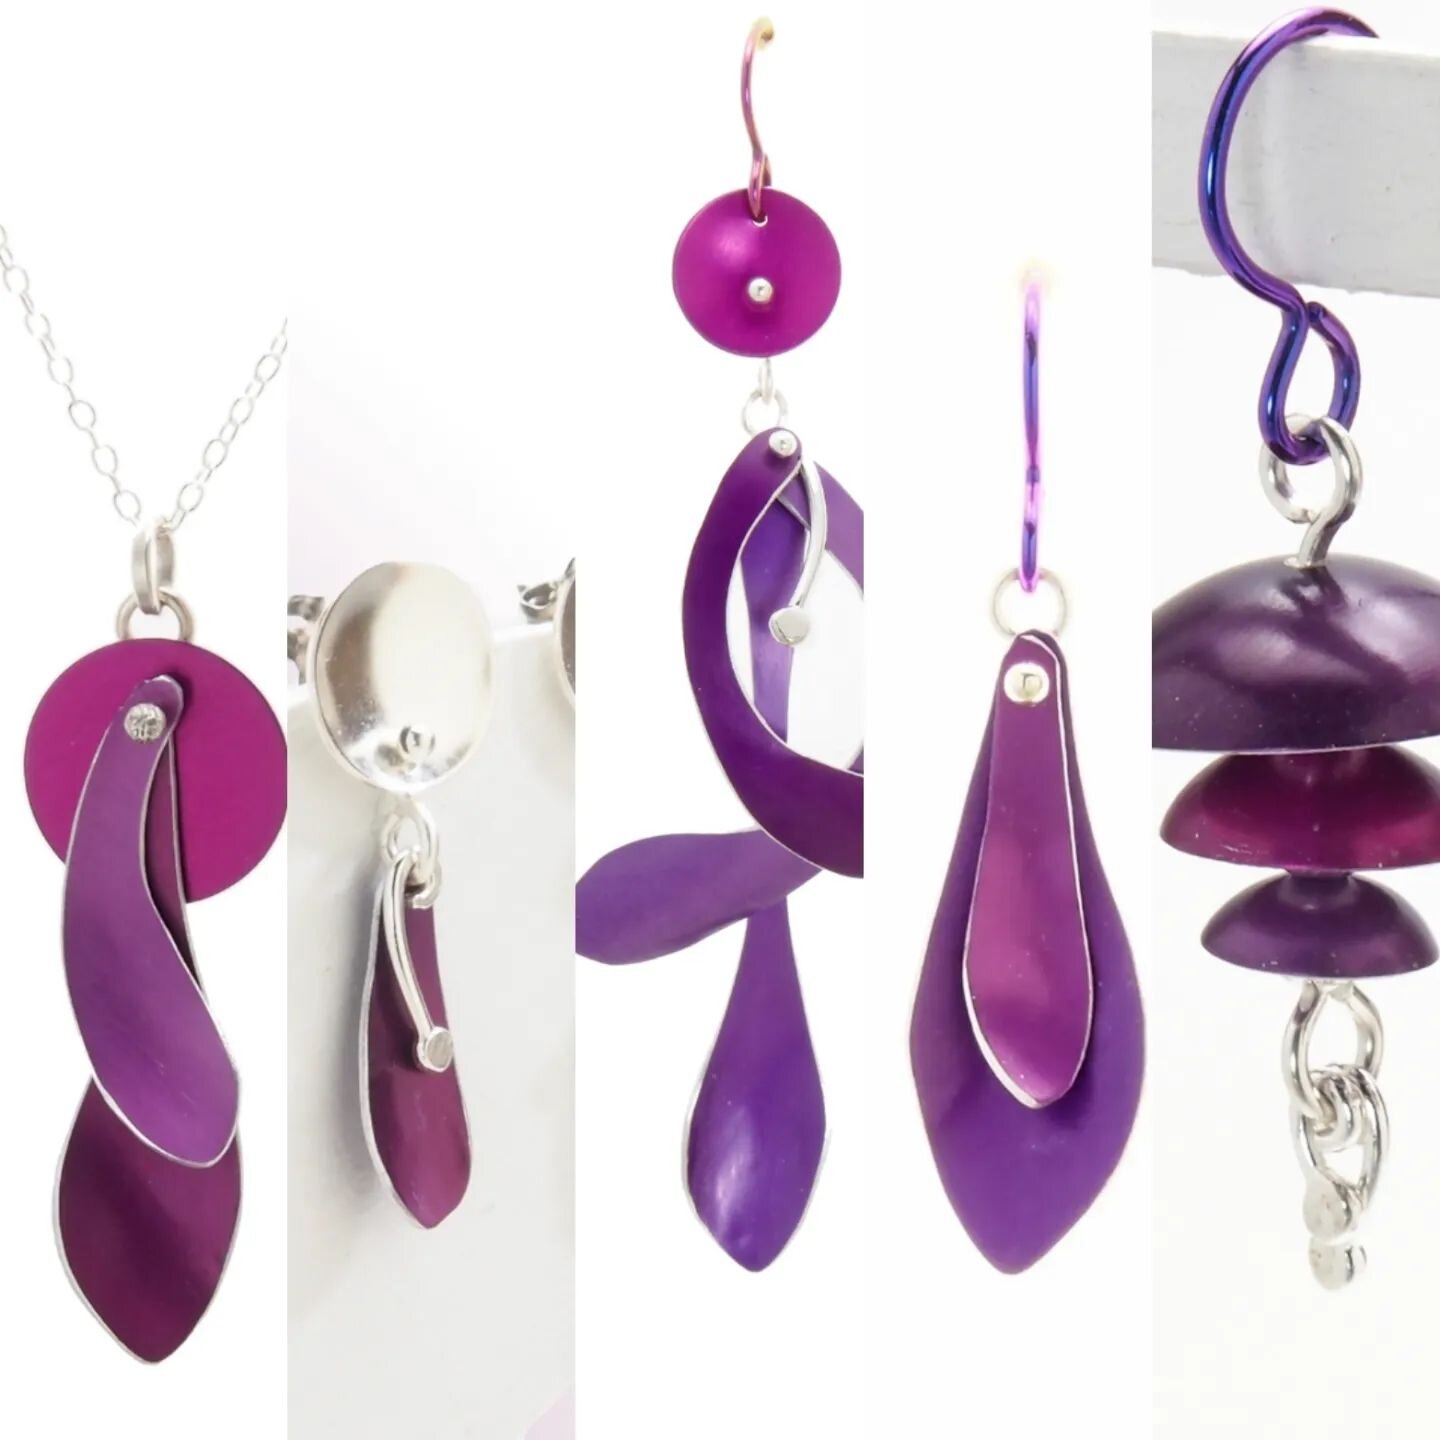 After much thought (aka procrastinating) I've decided to call my new collection &quot;Frolicsome&quot;  Now available on allenmetalarts.com and @albertastreetgallery
.
.
#handmadejewelry #anodizedaluminum #allenmetalarts #purplejewelry #aluminumjewel